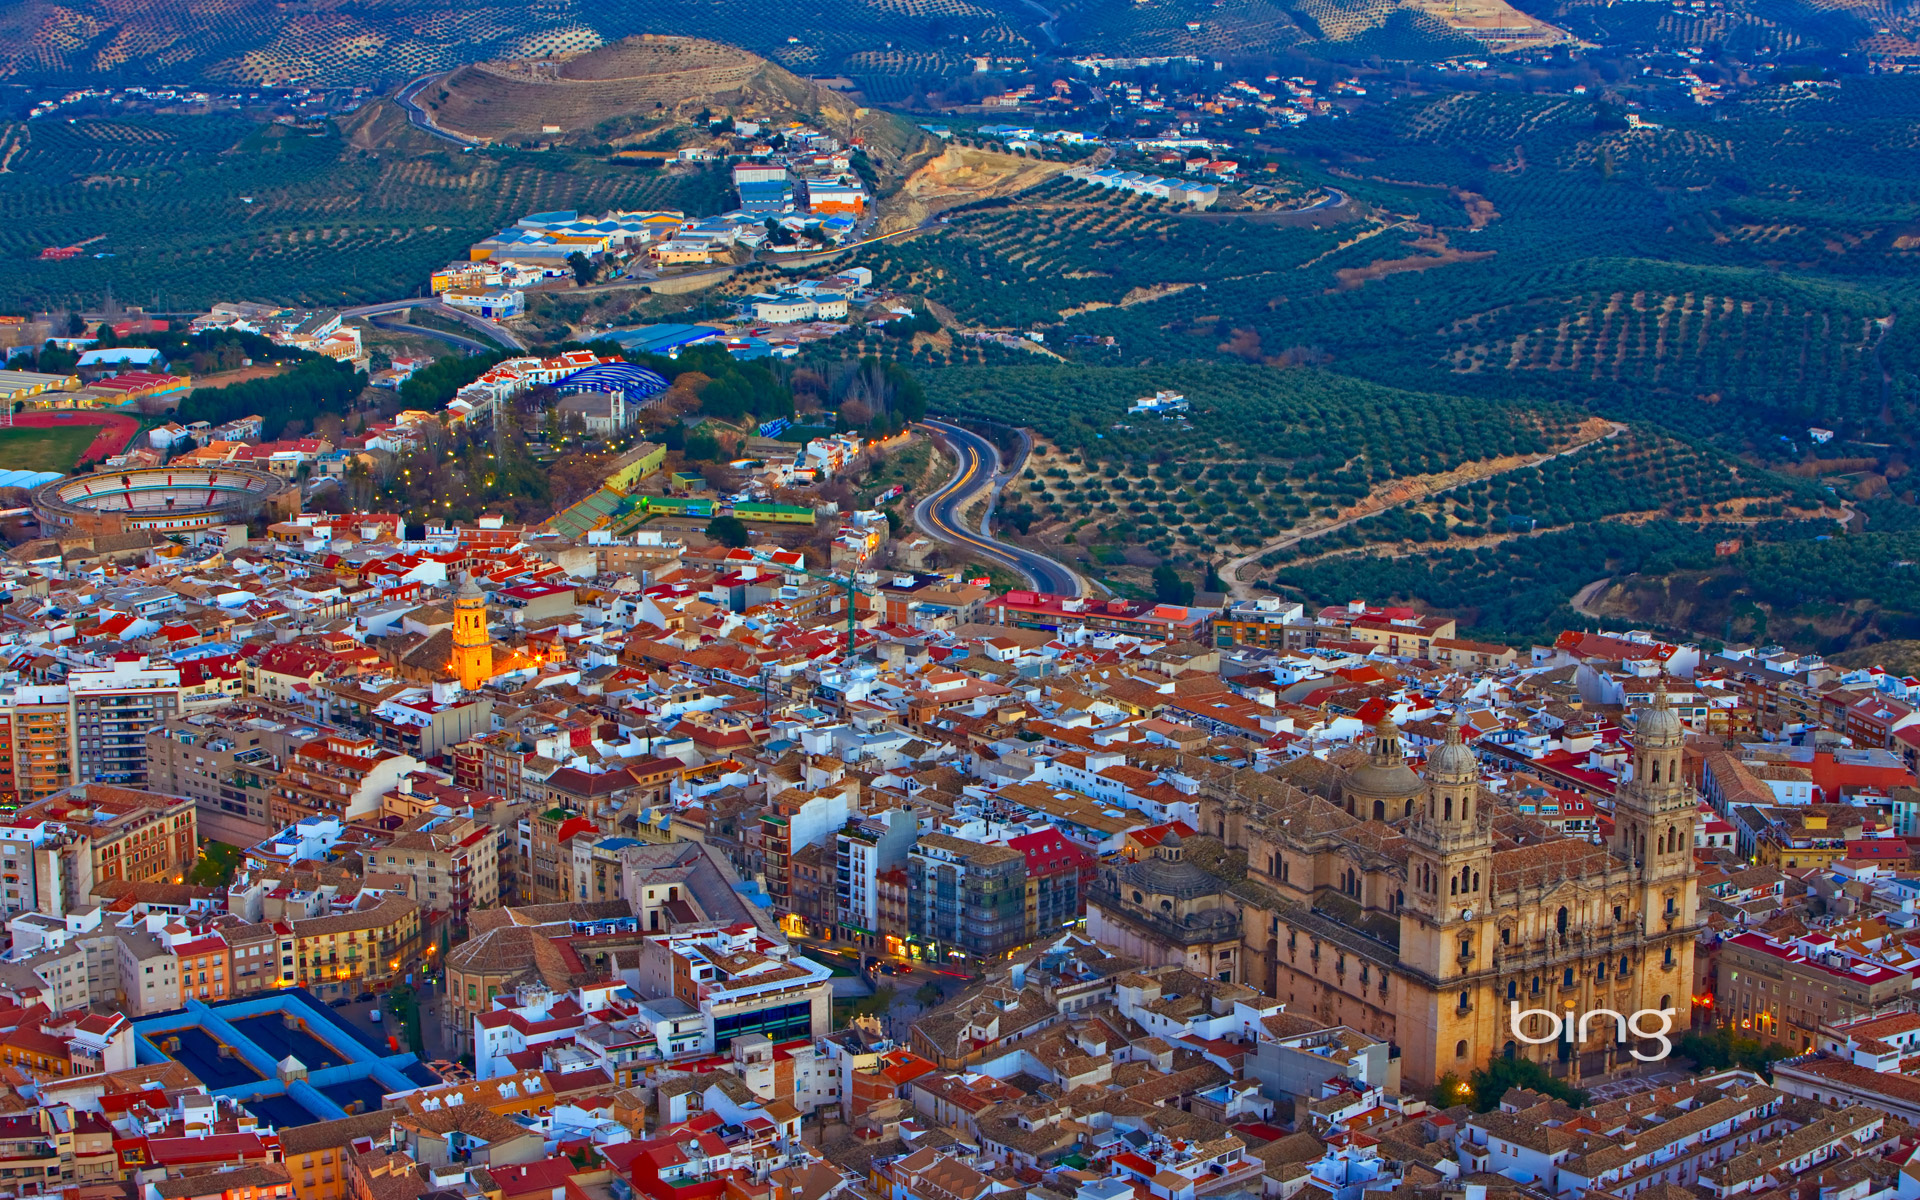 City of Jaén in Andalucia, Spain